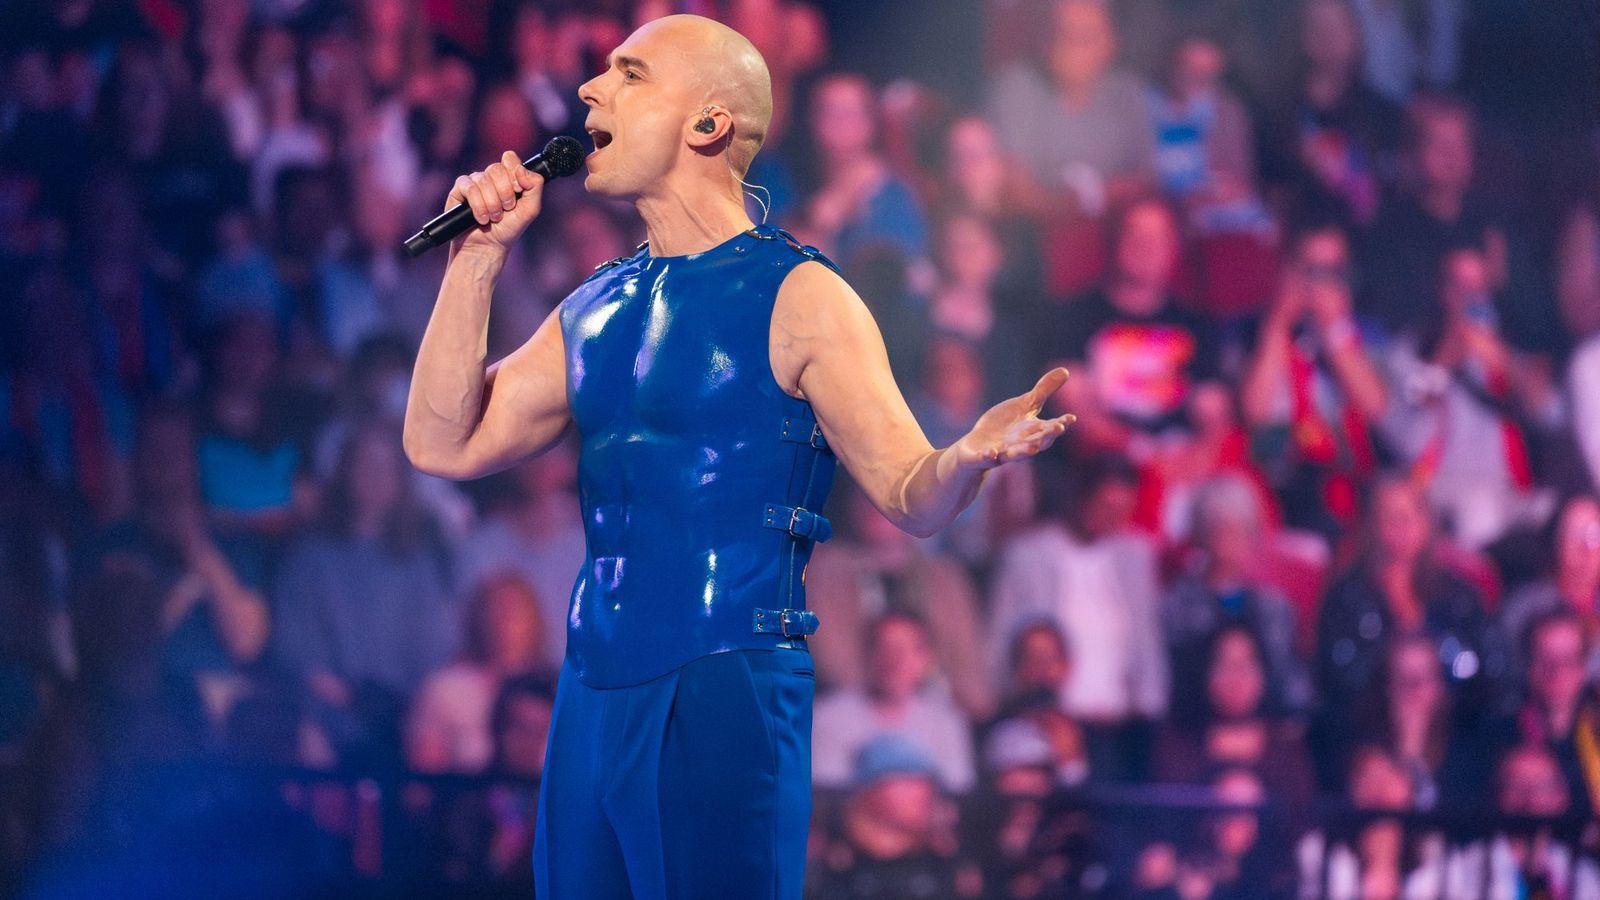 politics pushes its way into eurovision as final acts announced ahead of grand final